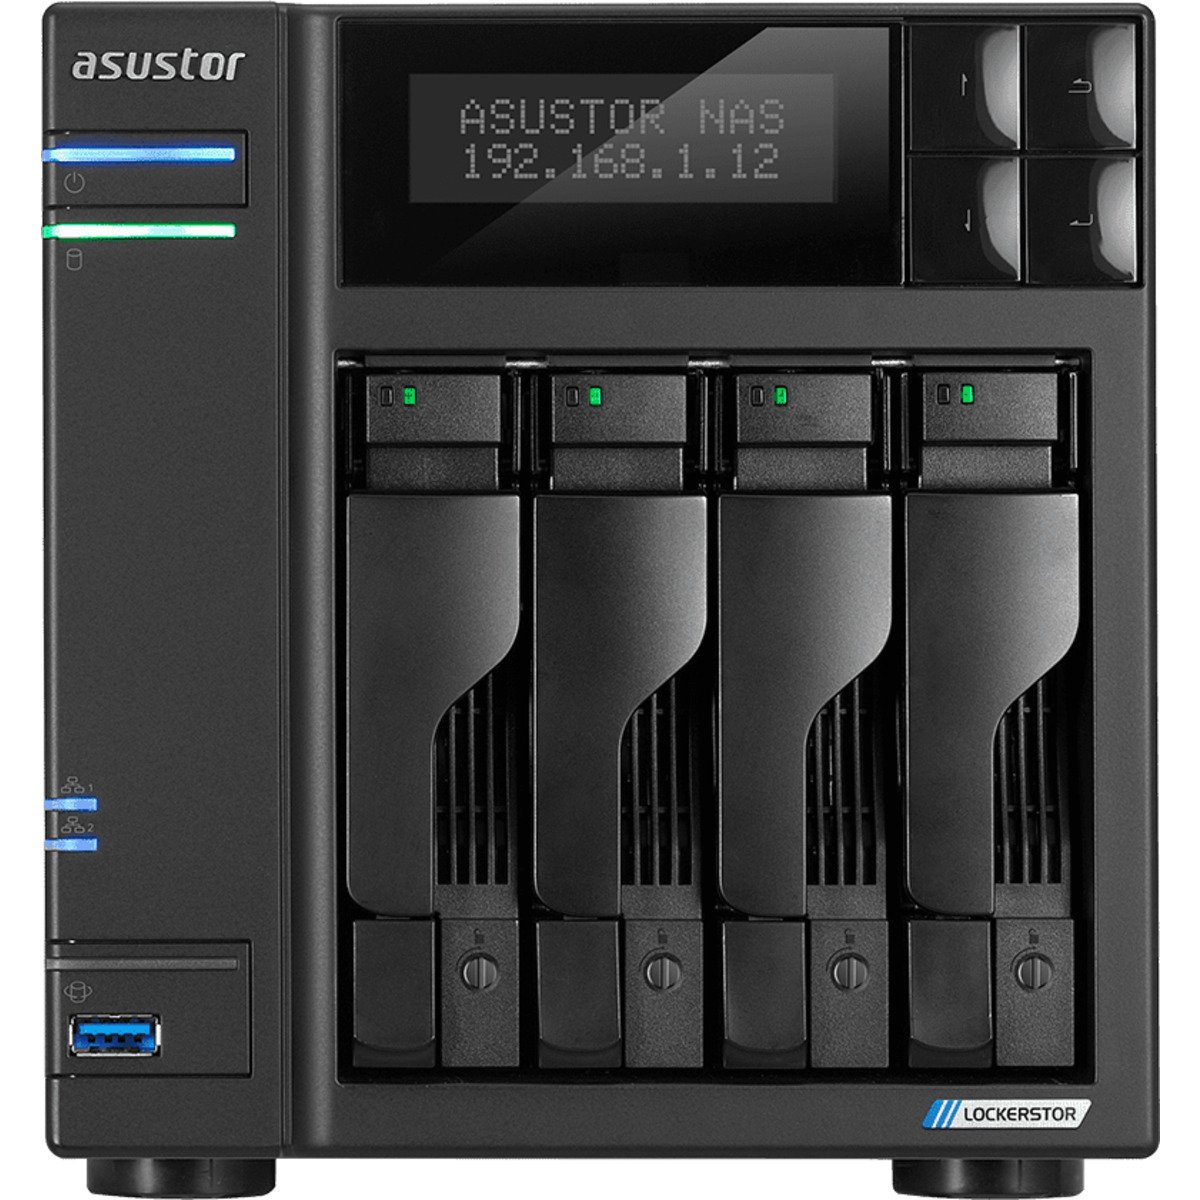 ASUSTOR AS6604T Lockerstor 4 44tb 4-Bay Desktop Multimedia / Power User / Business NAS - Network Attached Storage Device 2x22tb Seagate EXOS X22 ST22000NM001E 3.5 7200rpm SATA 6Gb/s HDD ENTERPRISE Class Drives Installed - Burn-In Tested - FREE RAM UPGRADE AS6604T Lockerstor 4